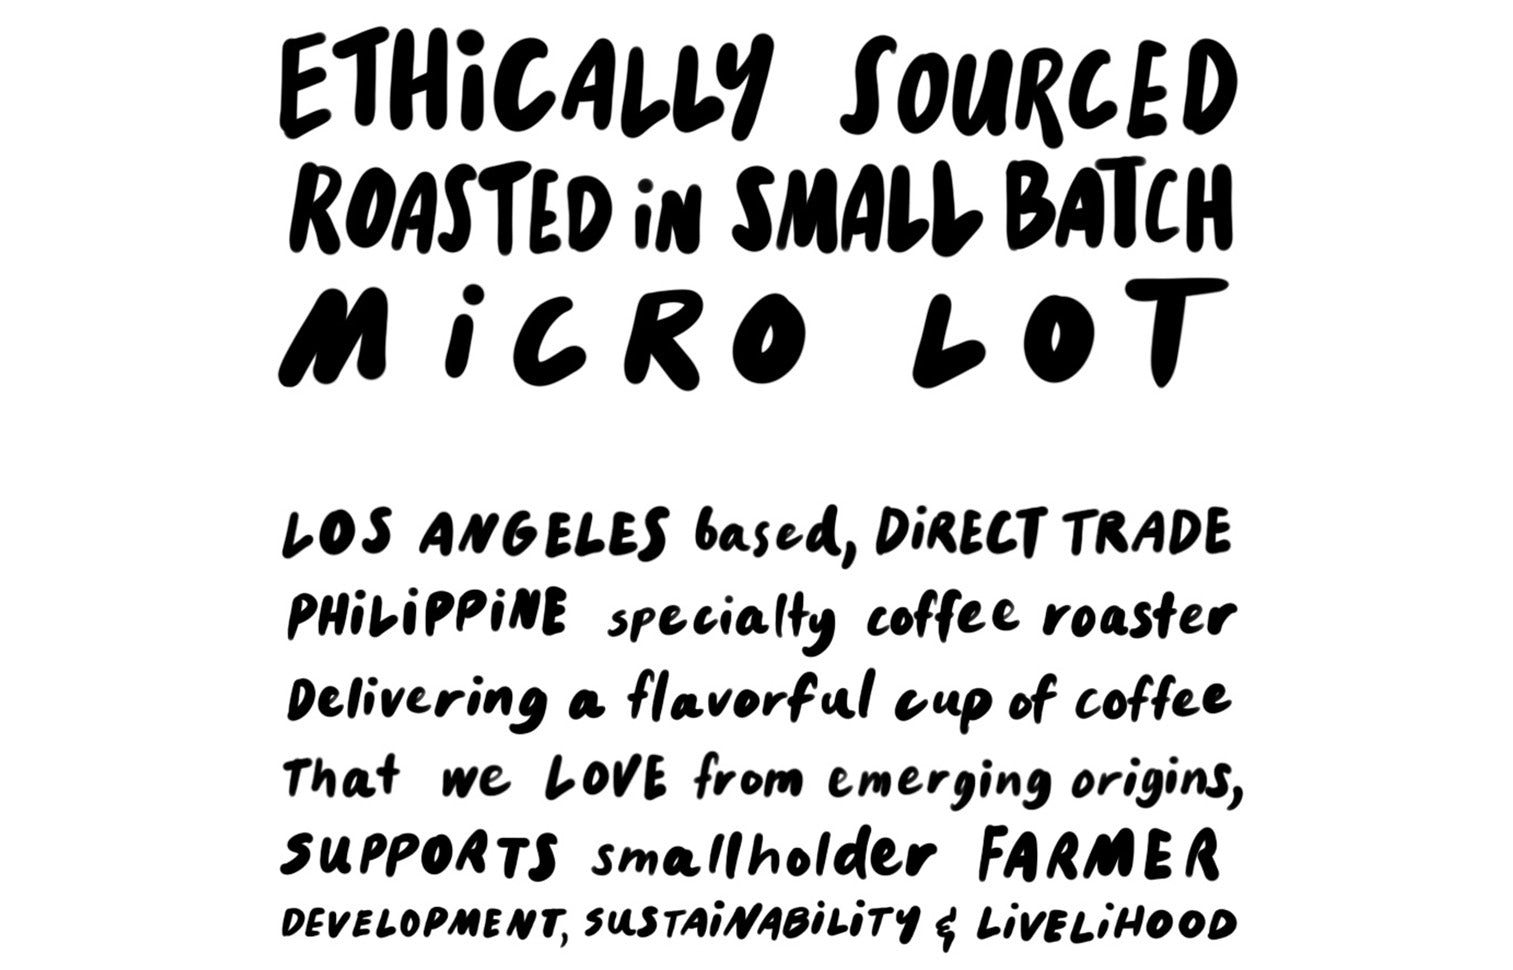 Ethically sourced, roasted in small batch micro lot. Los Angeles based, direct trade philippine speciality coffee roaster. Delivering a flavorful cup of coffee that we love from emerging origins. Supports smallholder farmer development, sustainability, and livelihood